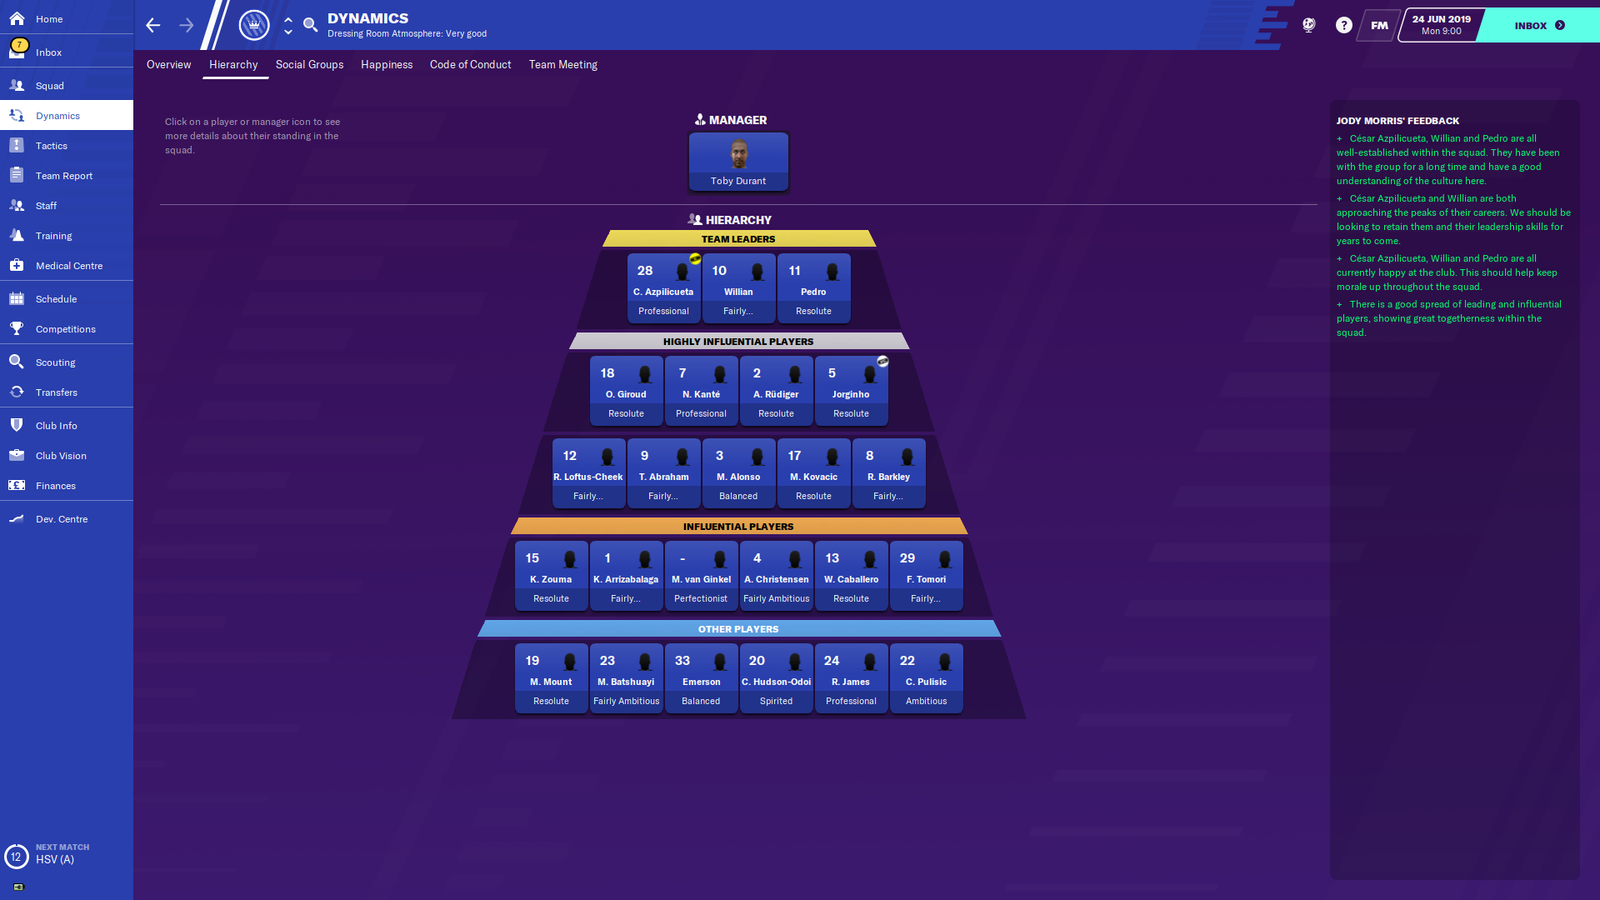 Chelsea's squad dynamics in Football Manager 2020